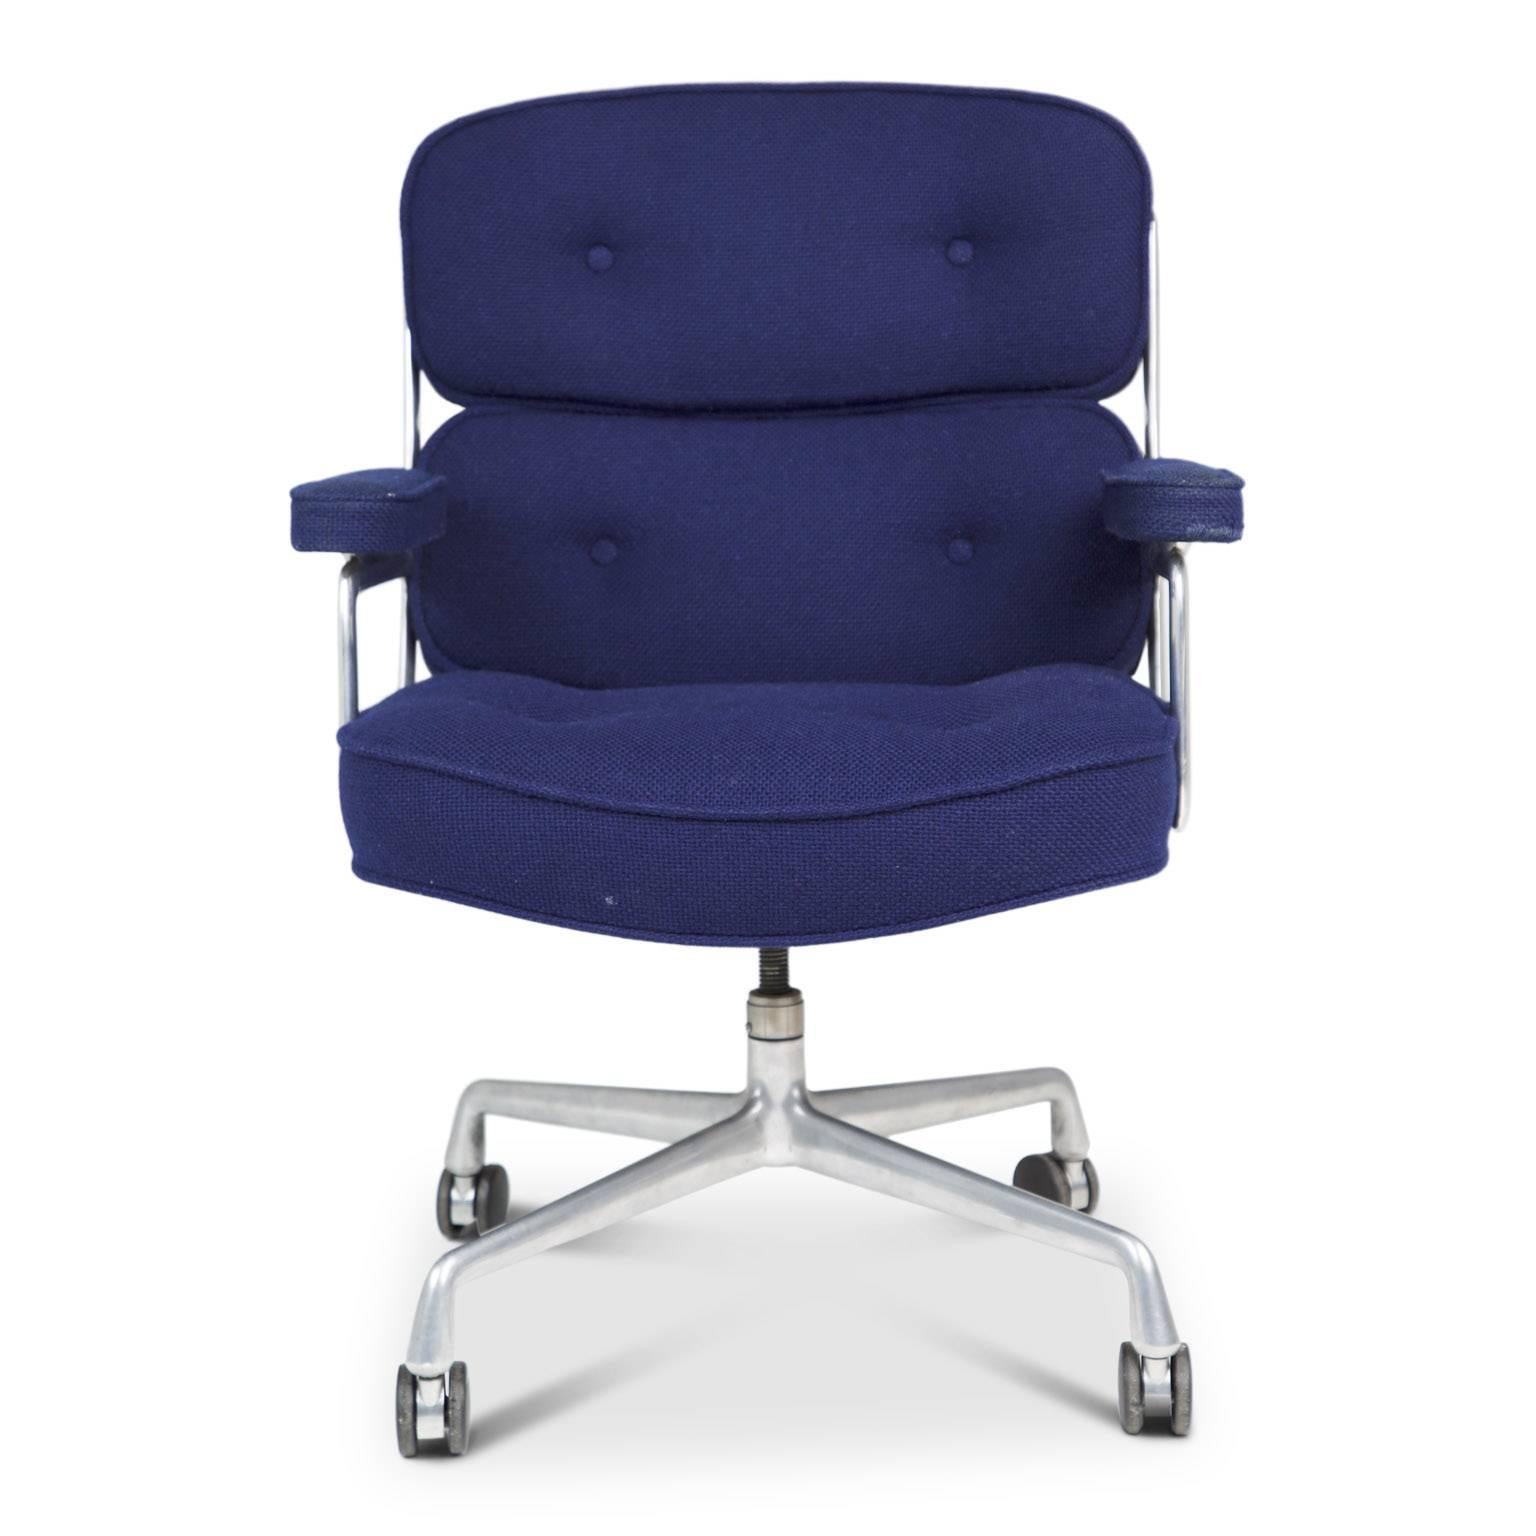 Designed by Charles Eames in 1959 for the Time Life building in New York City, this executive office chair still claims its tenure as the pinnacle of professional style. 

Upholstered in an on-trend deep royal blue woven wool material with tufting